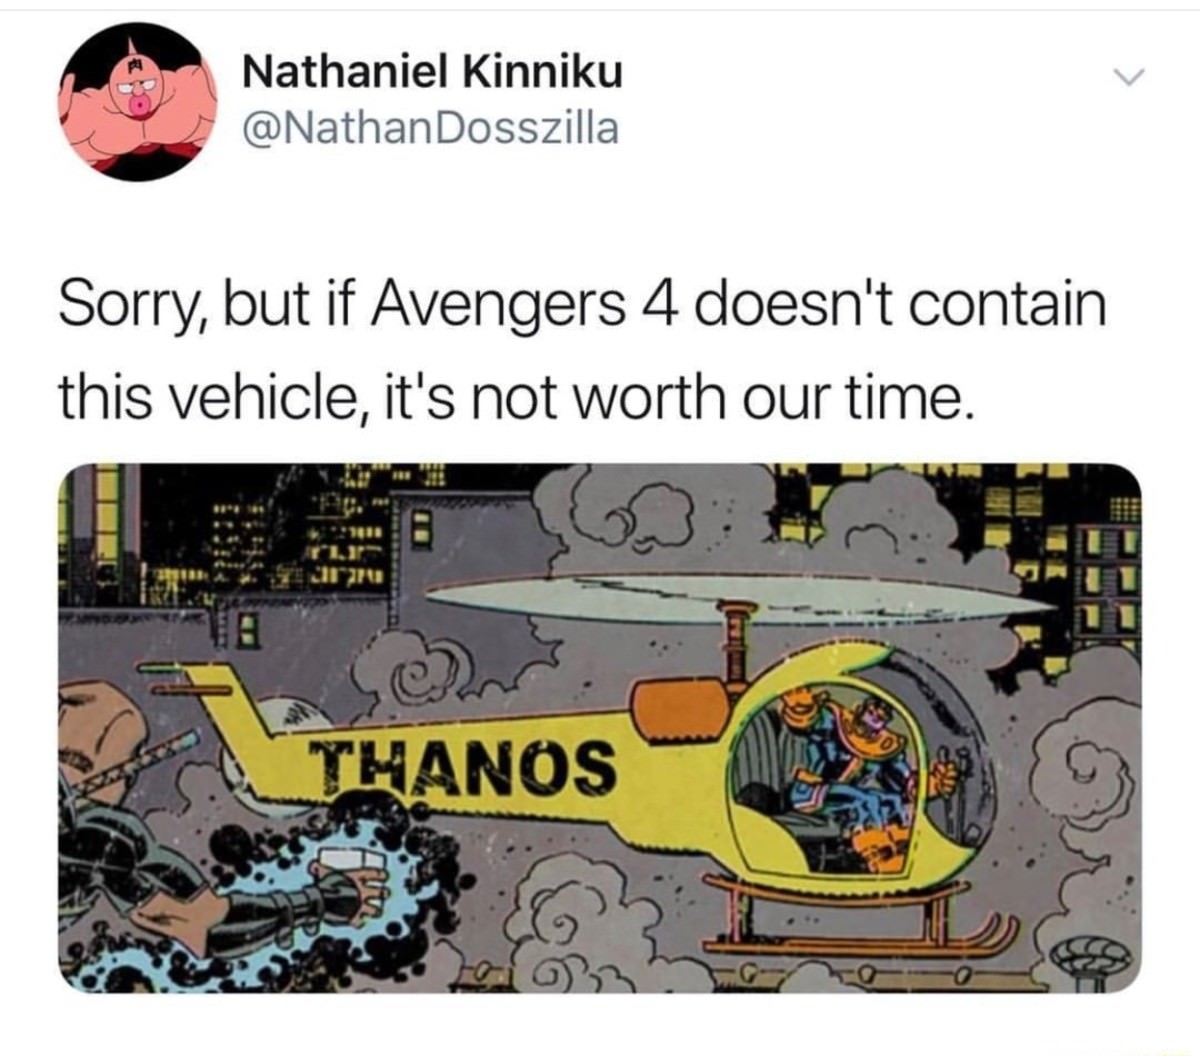 thanos helicopter meme - Nathaniel Kinniku Dosszilla Sorry, but if Avengers 4 doesn't contain this vehicle, it's not worth our time. It Thanos